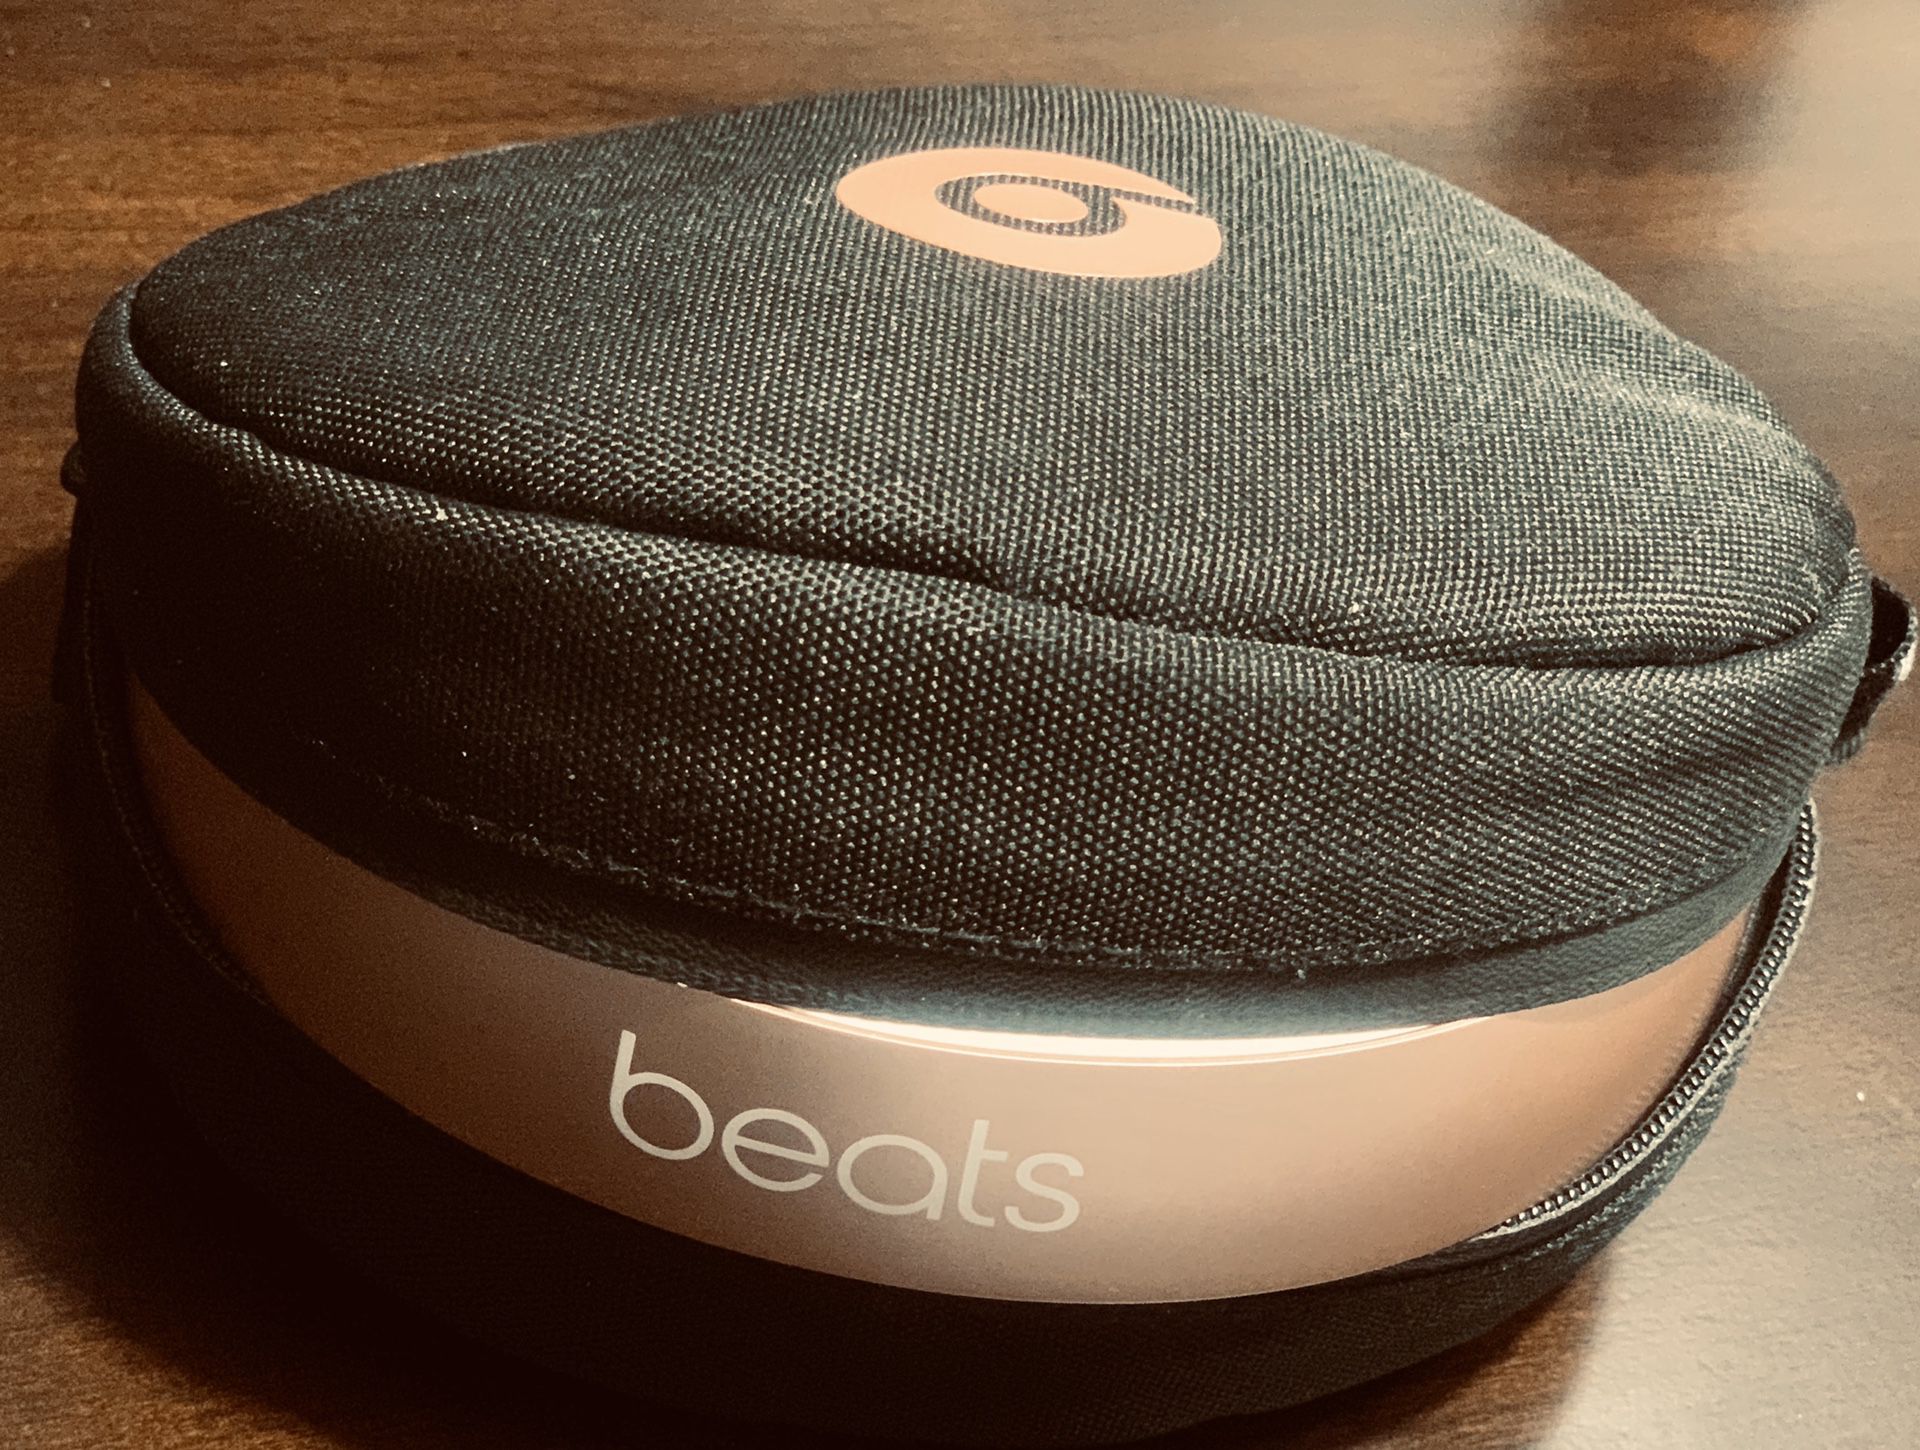 Beats Solo 3 wireless headphones | Like new | All accessories included.